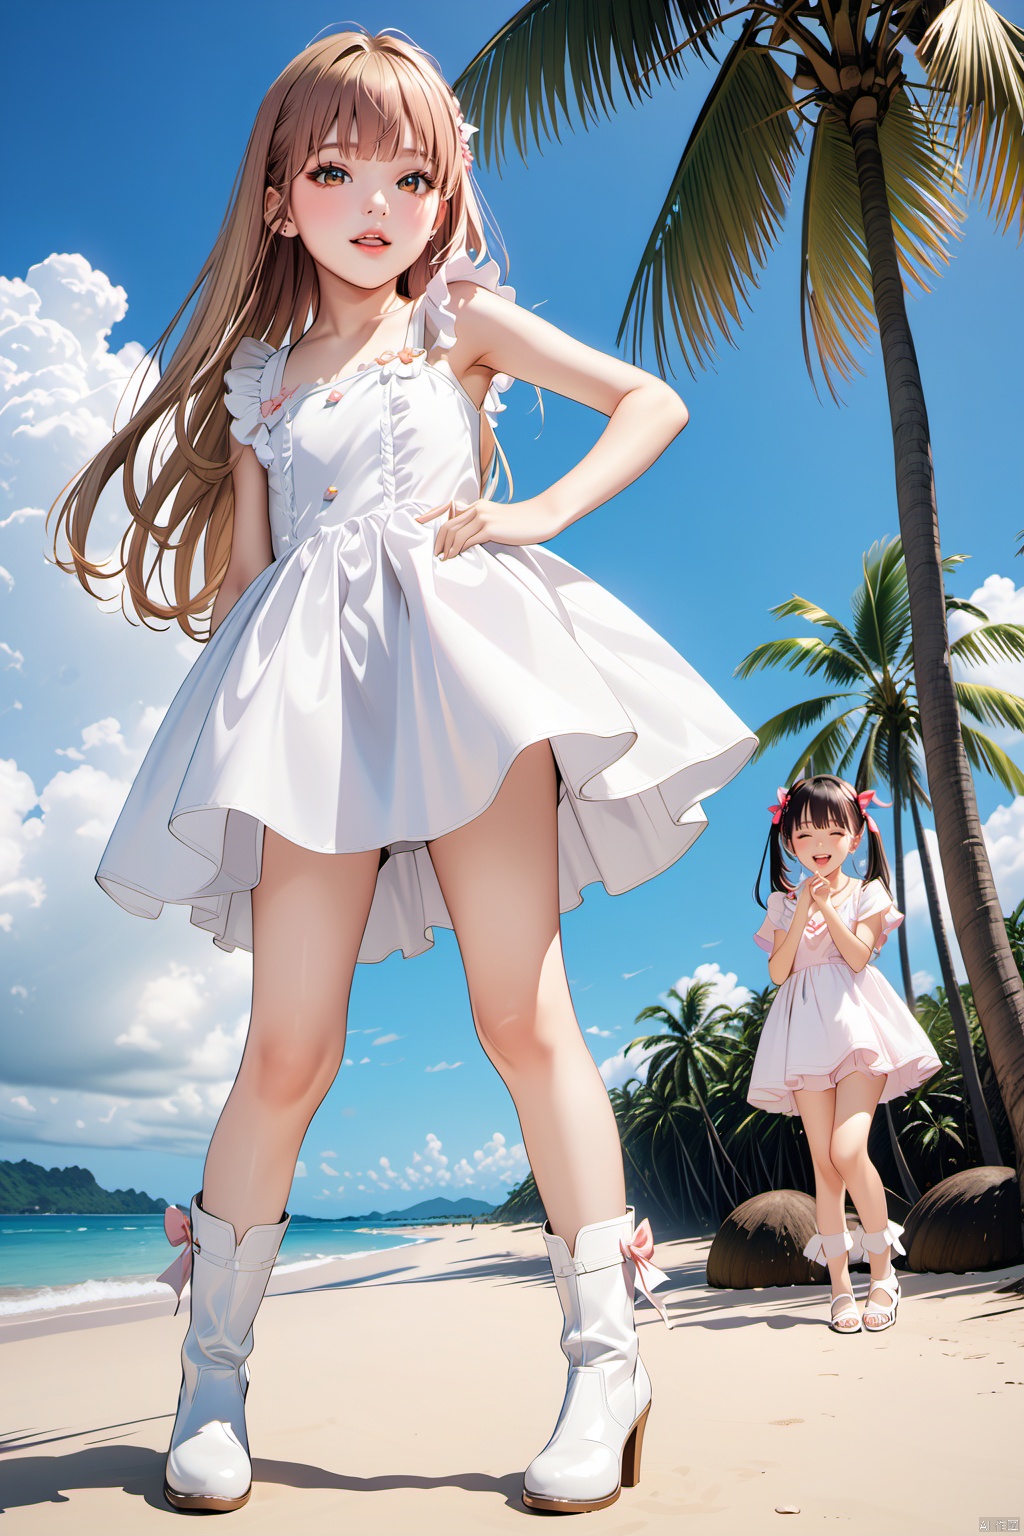  2girls, multiple colored hairs, random cute faces, group shot, zoom camera, (expression:1.0), (dynamic_pose:1.2), (action_pose:1.2), (action:1.0), (distance shot:1.5), (full_body:1.2), (full body:1.2),Beach, coconut trees,,(smile:1.0),dress,long_legs, high heels, loli, kneehigh_boots, thighhigh_boots,playtime,